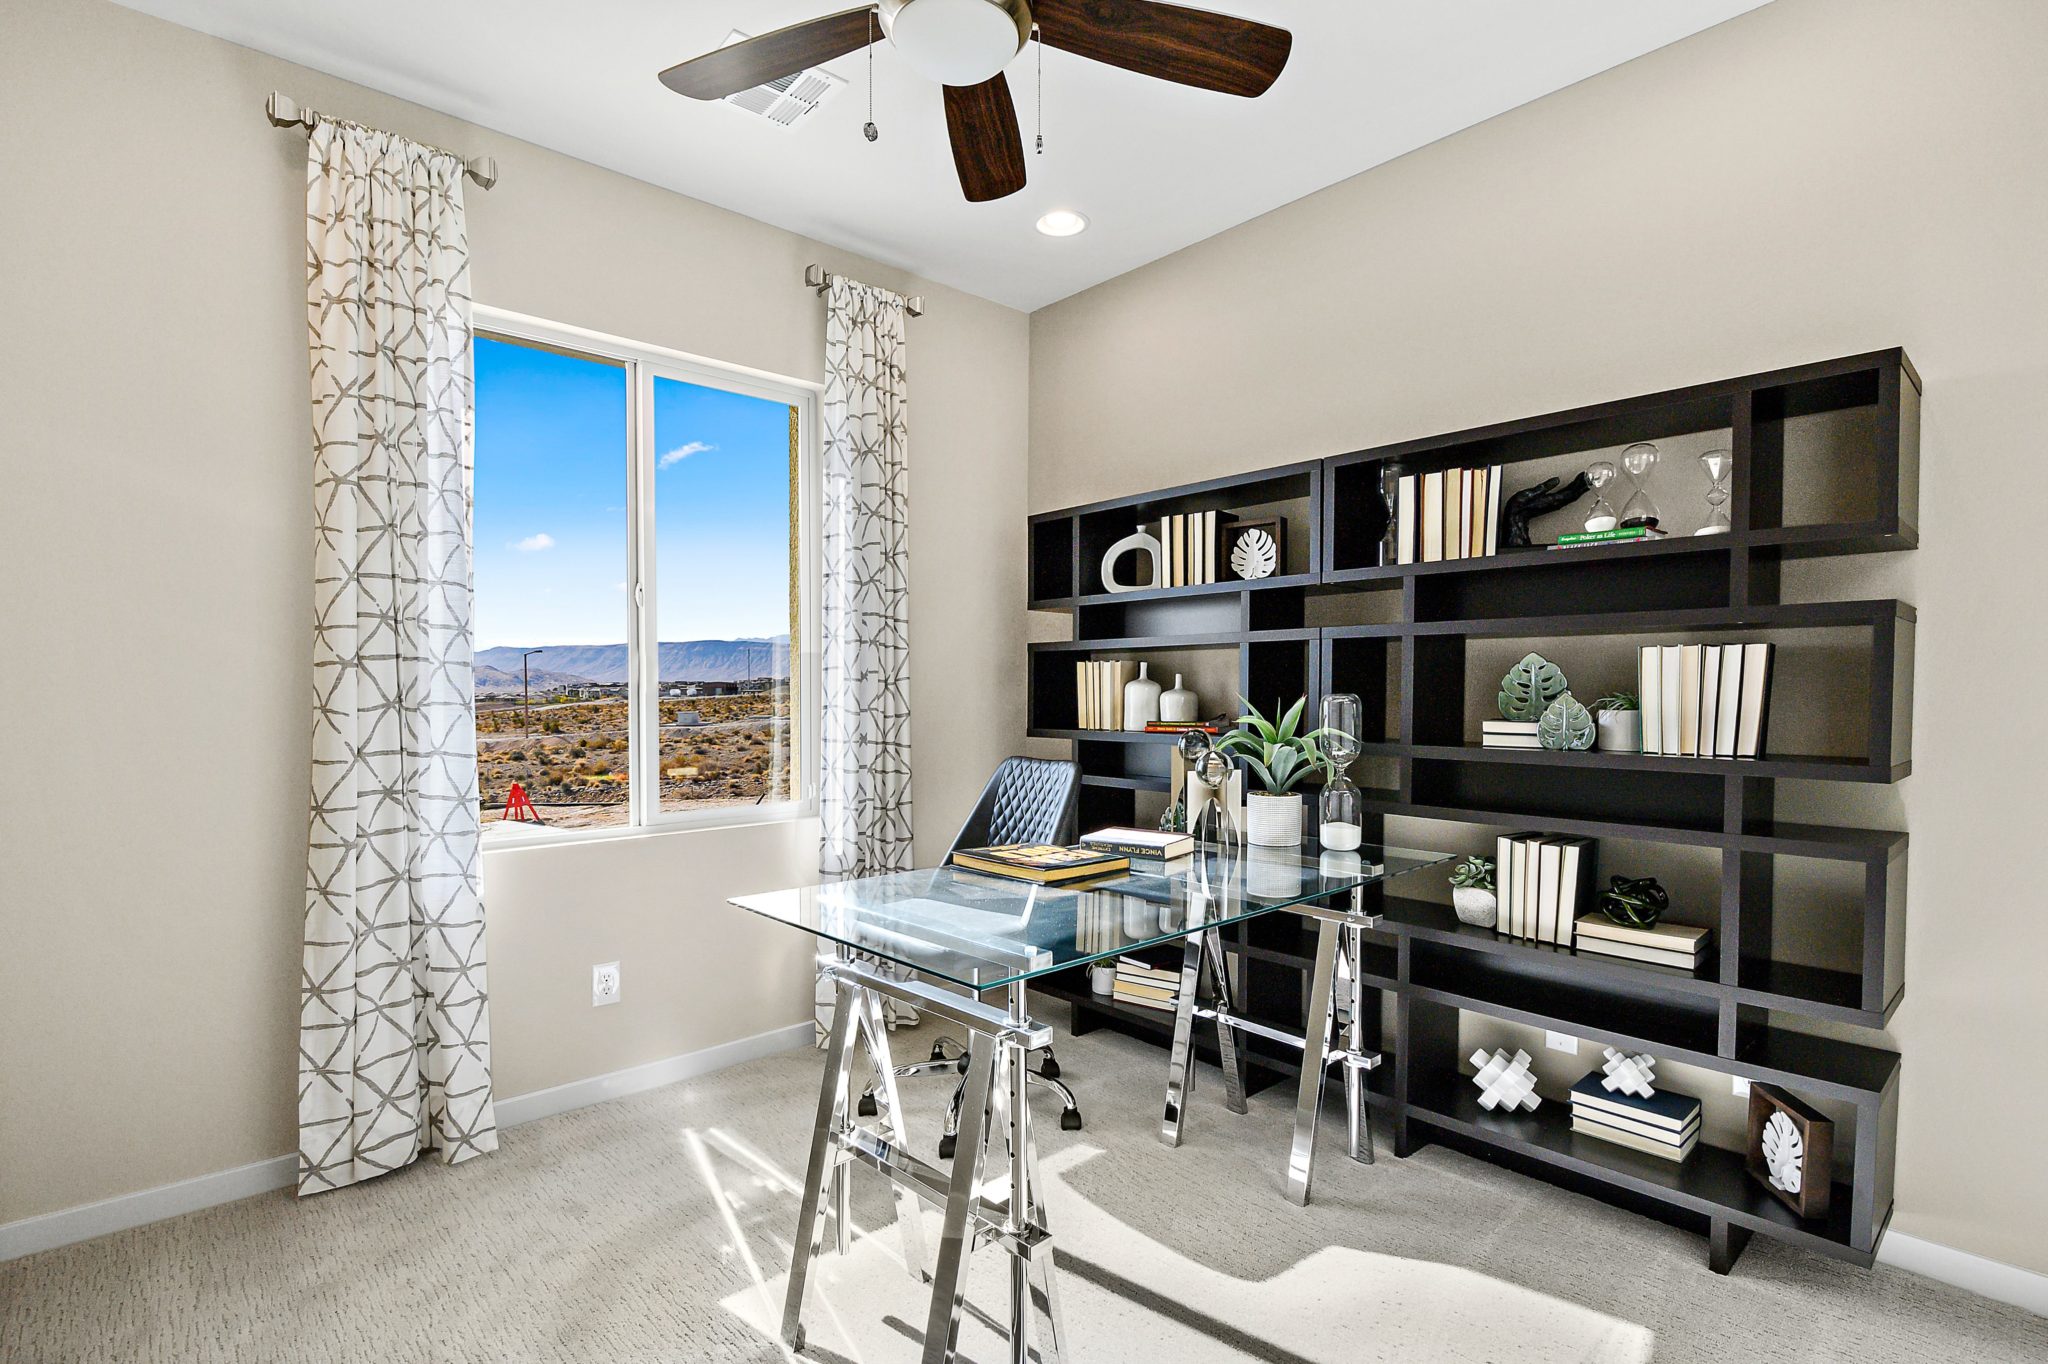 Office in Acacia Model at Crested Canyon by Taylor Morrison in Summerlin